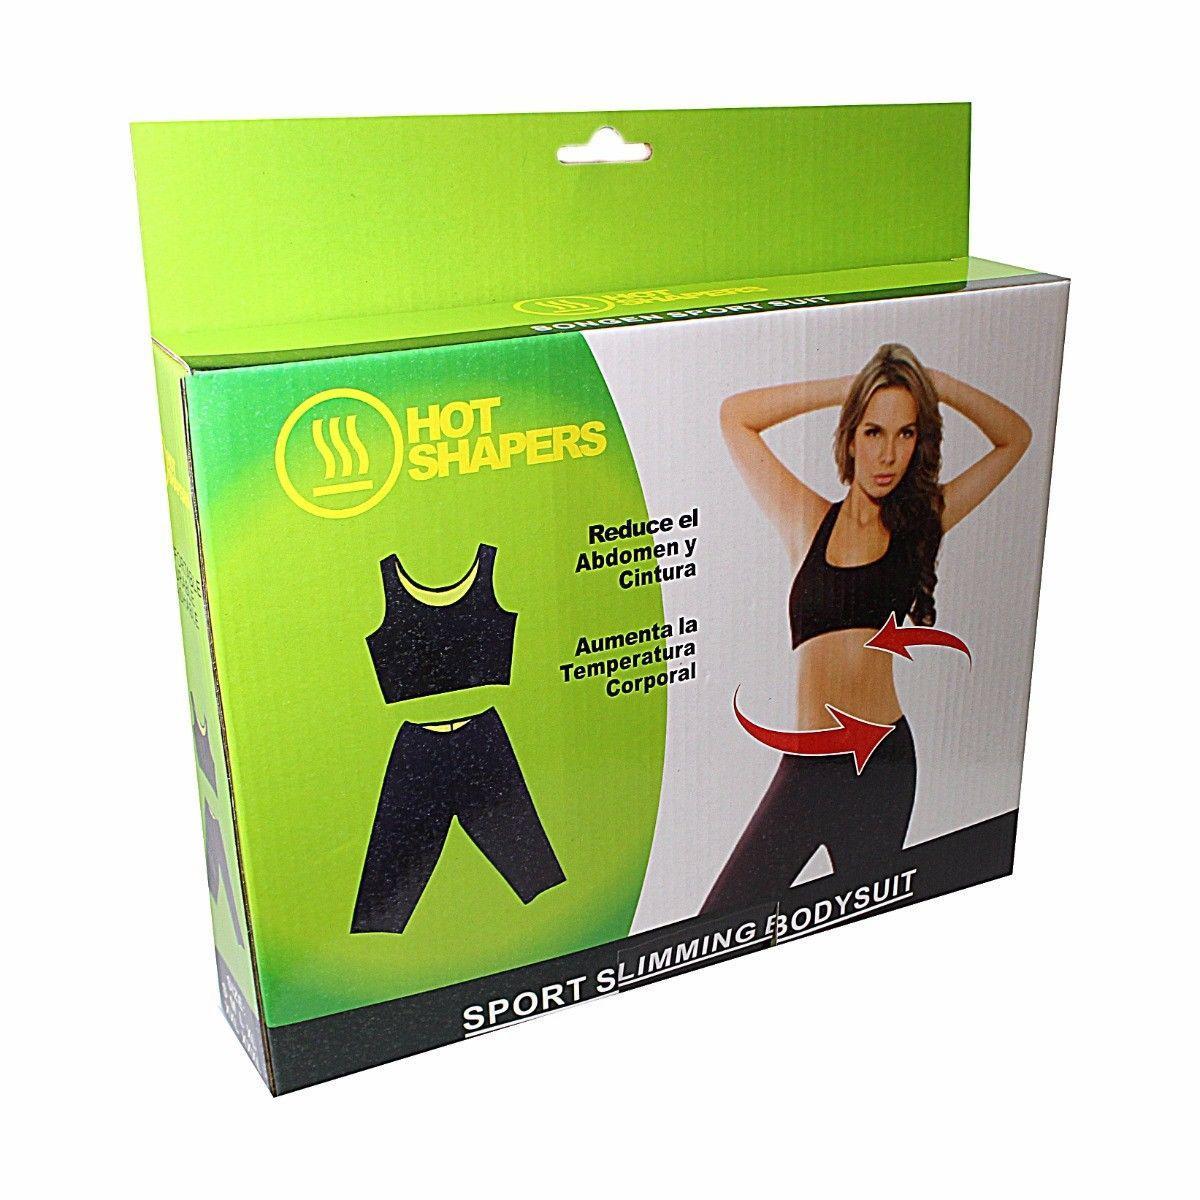 Hot Shapers Sport Slimming Bodysuit Home Health 4399 (Large Letter Rate)